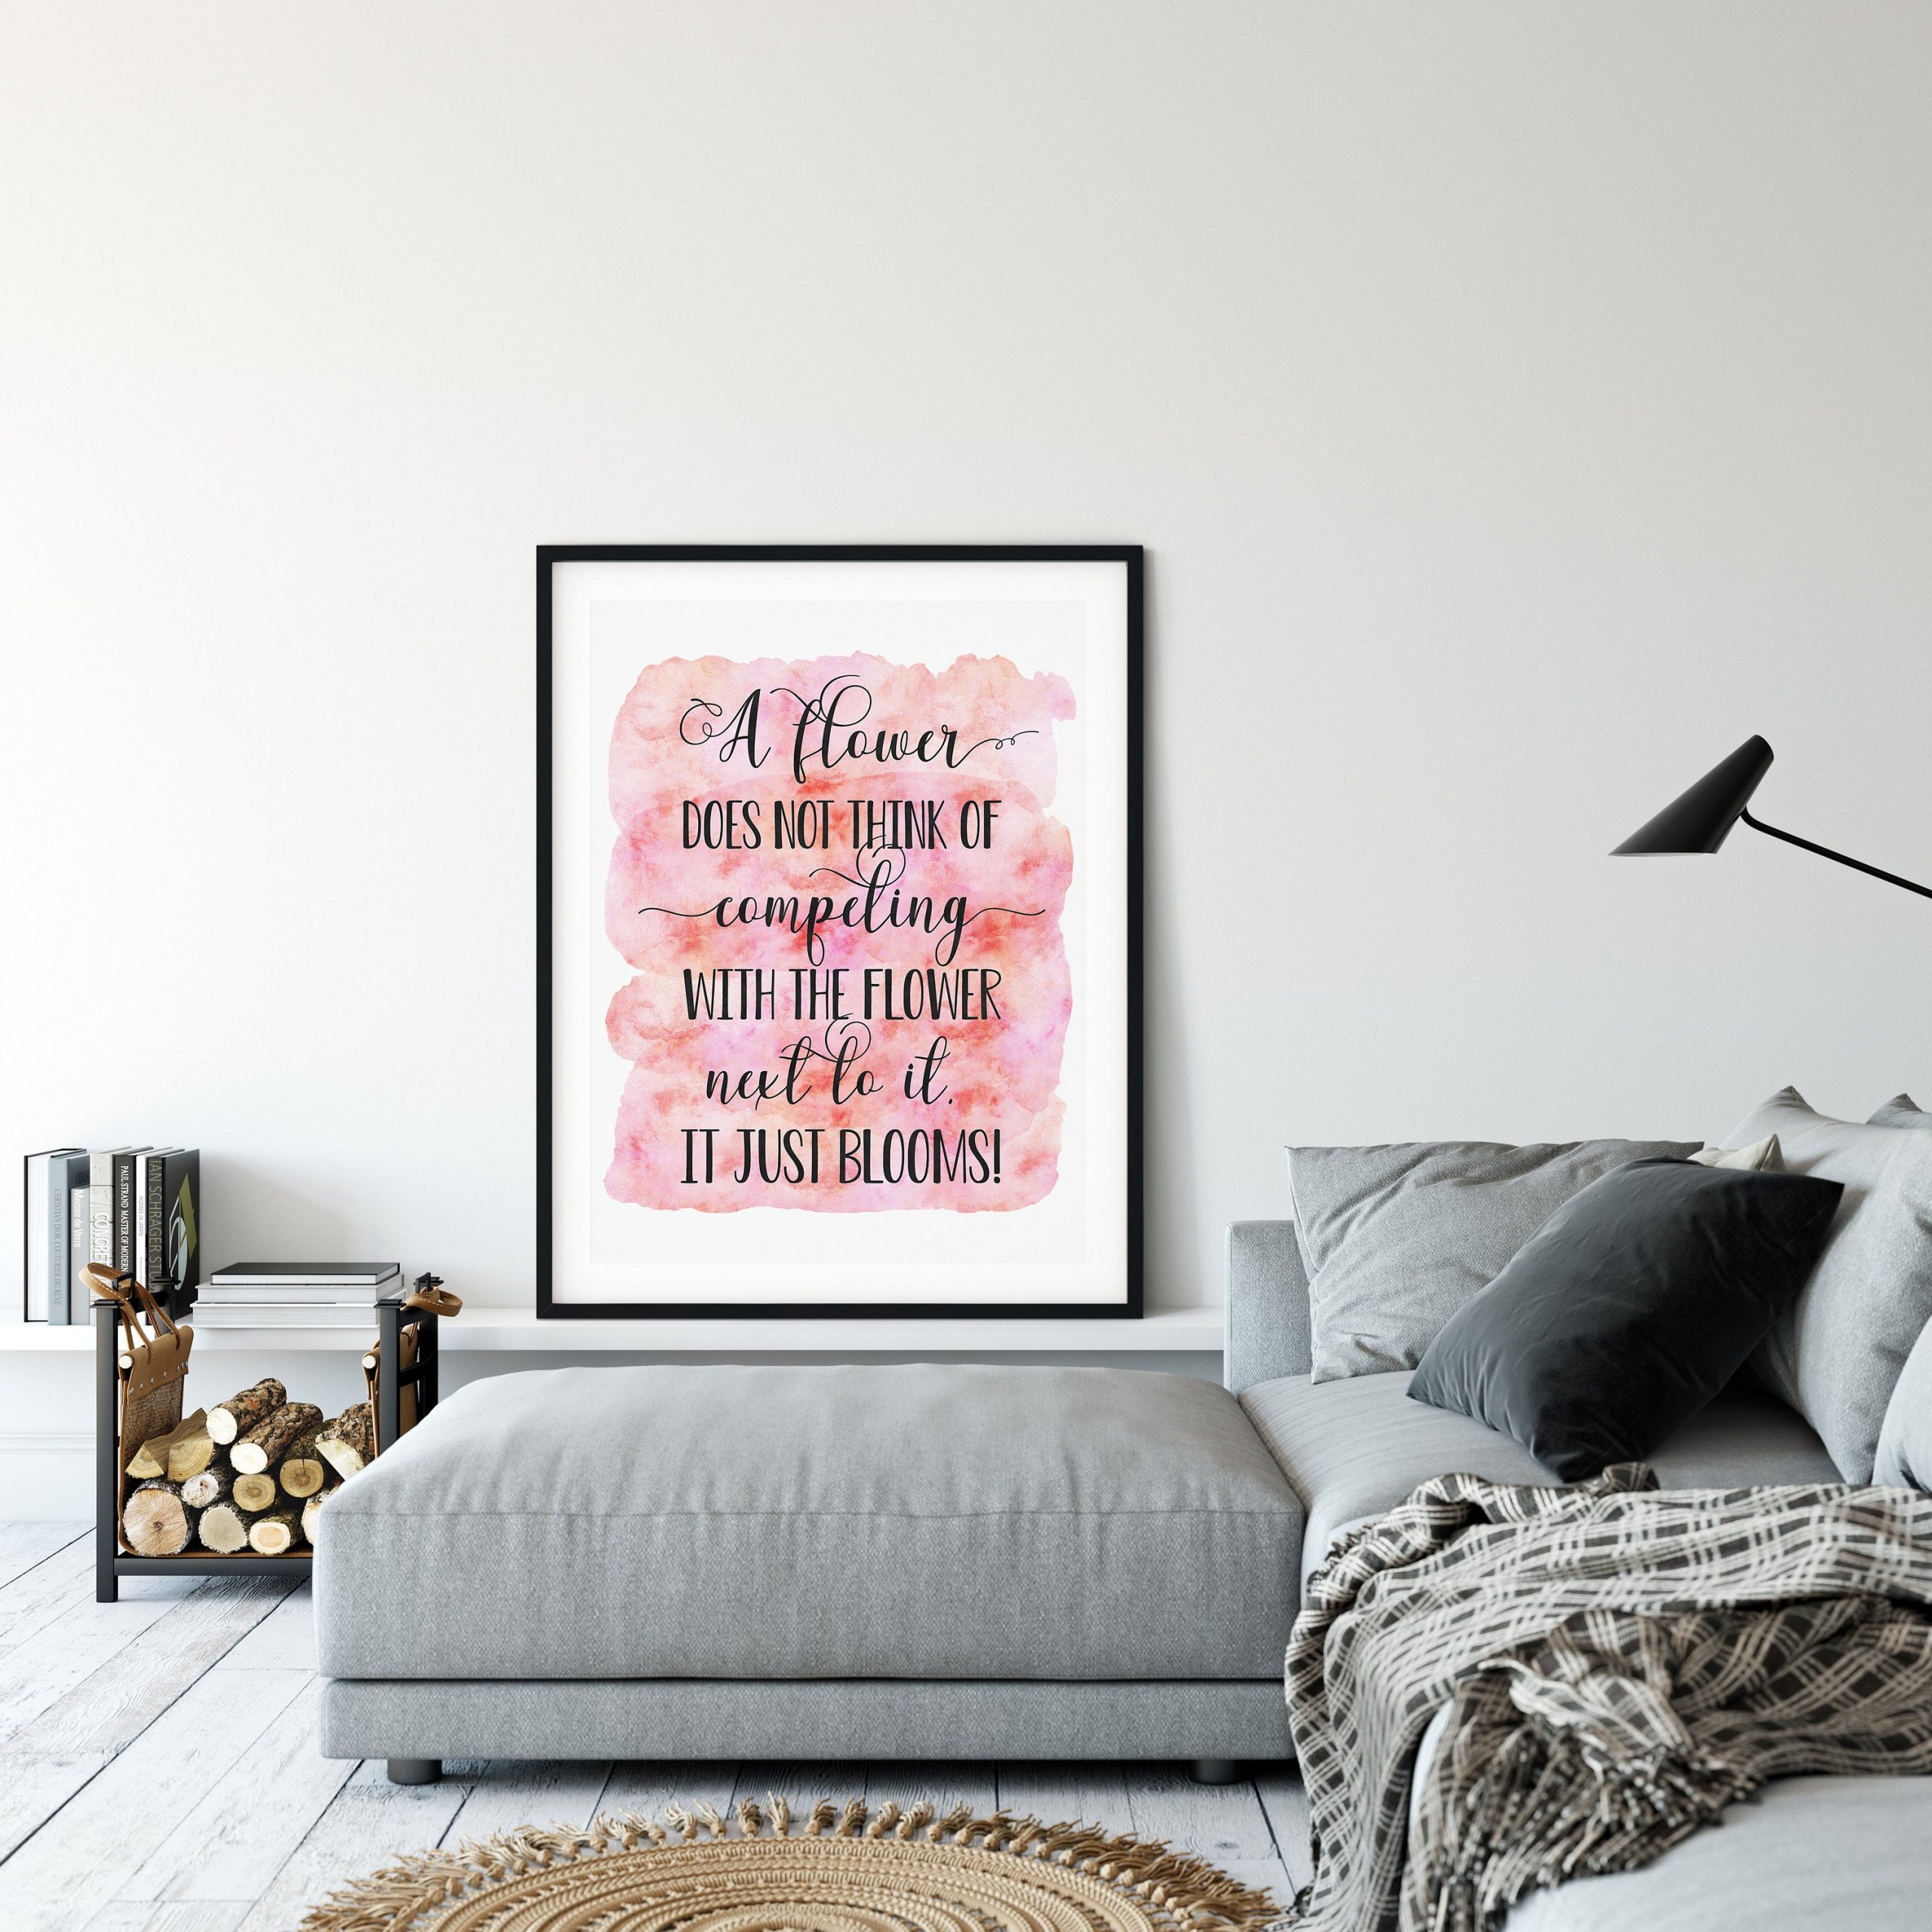 A Flower Does Not Think Of Competing, Inspirational Wall Art, Nursery Print